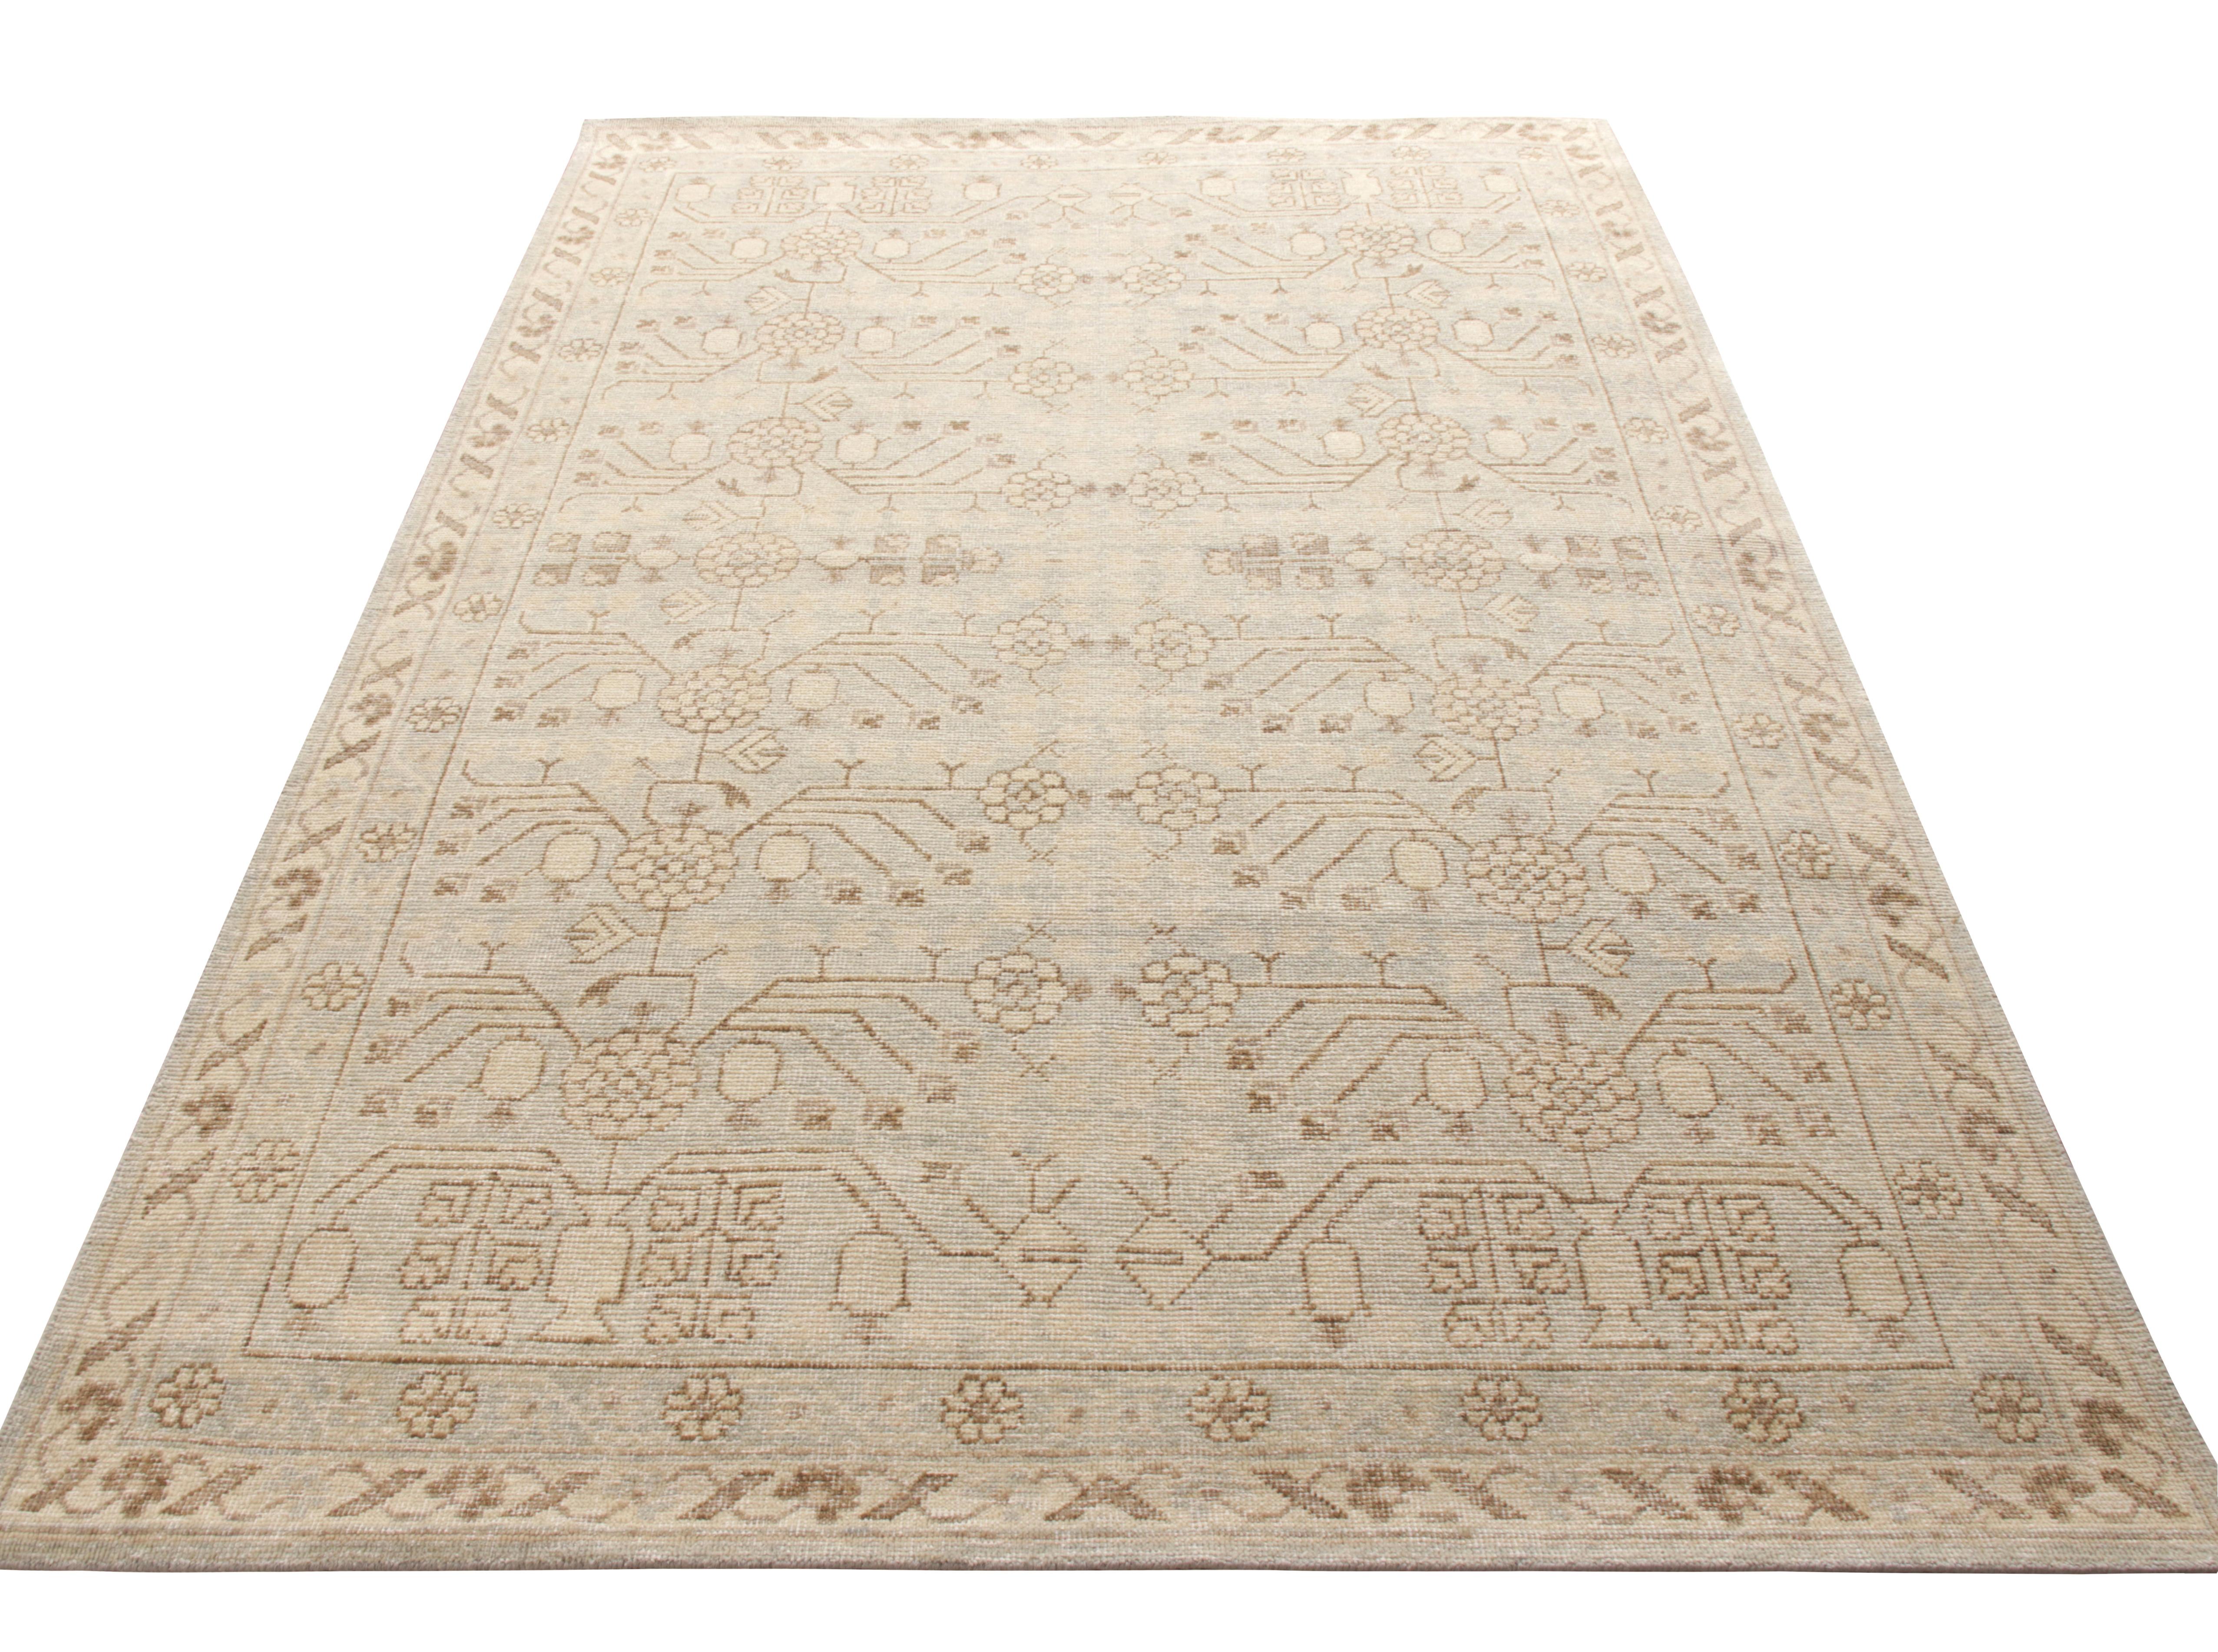 Hand knotted in wool, the Homage collection by Rug & Kilim presents this unique distressed take on the celebrated Khotan style rugs capturing their rustic shabby chic appeal on a very subtle background. The revered pomegranate pattern embraces this